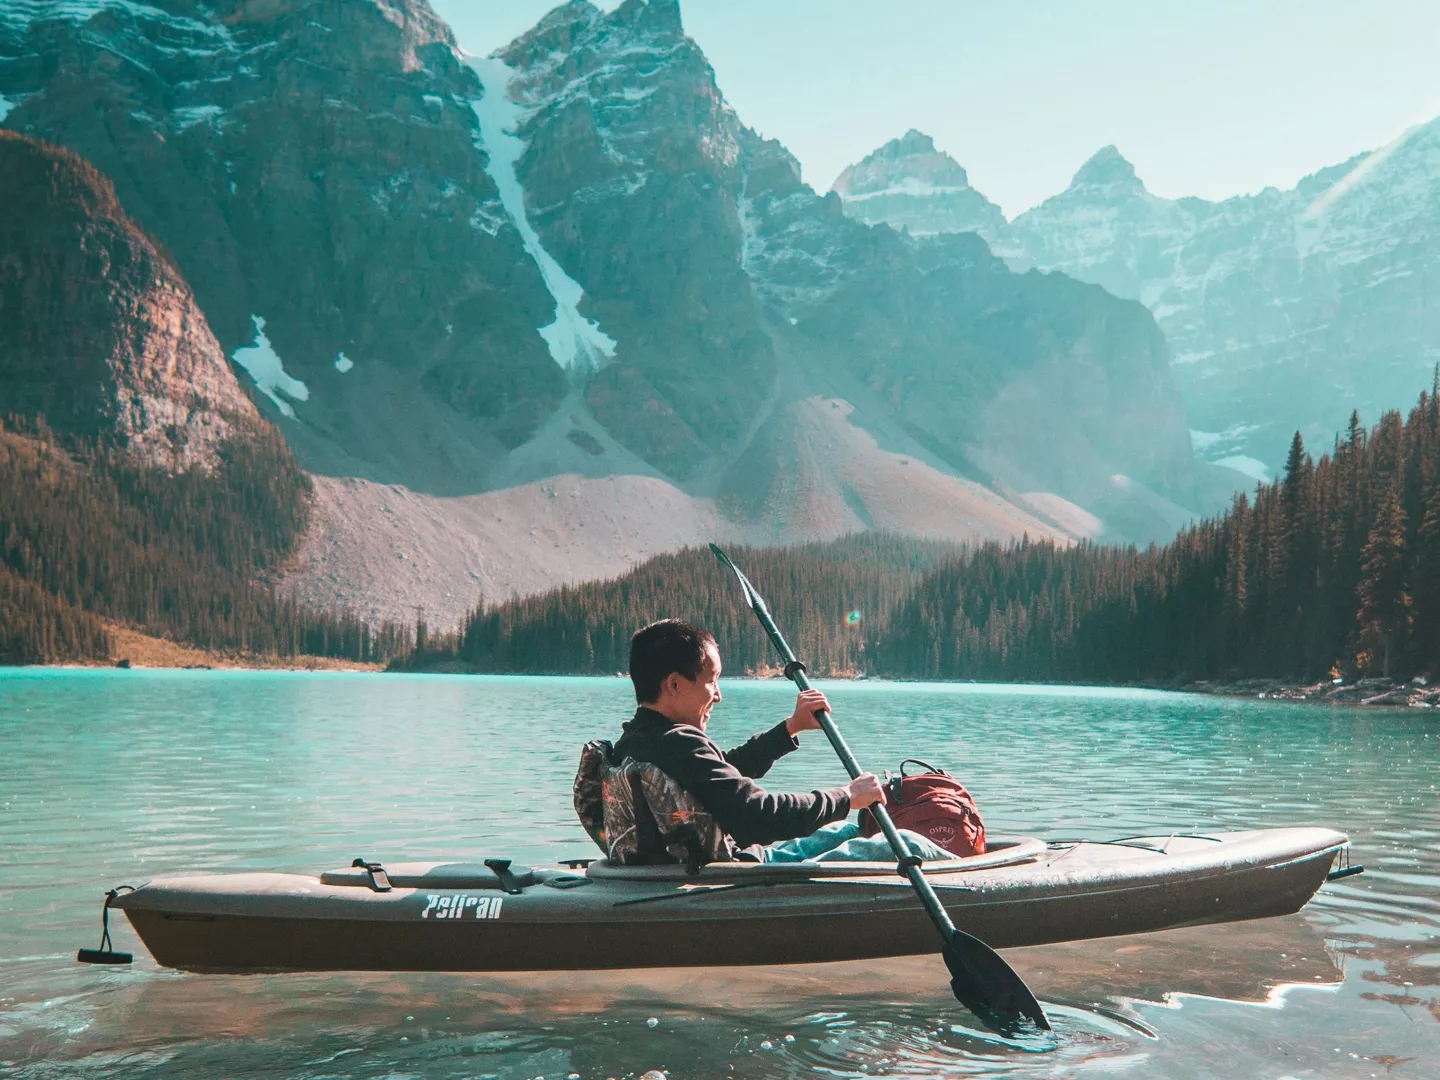 A person on a kayak with mountains in the background